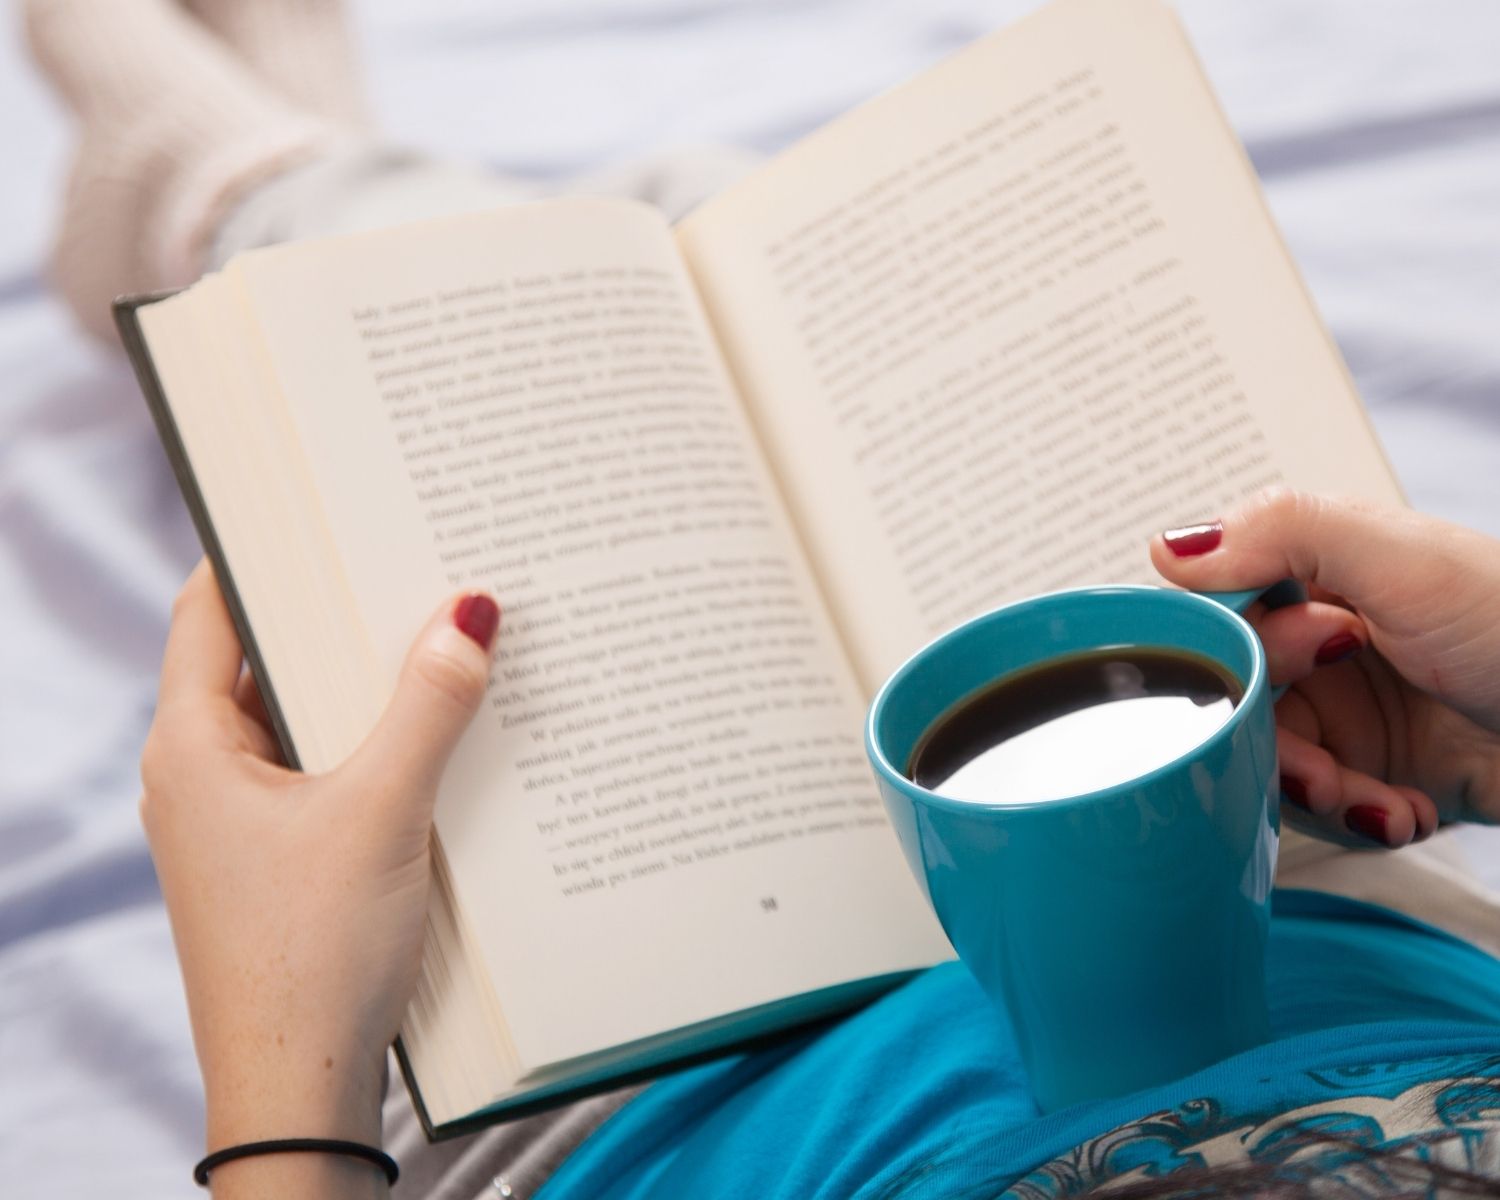 A person holding a book on their lap and a coffee